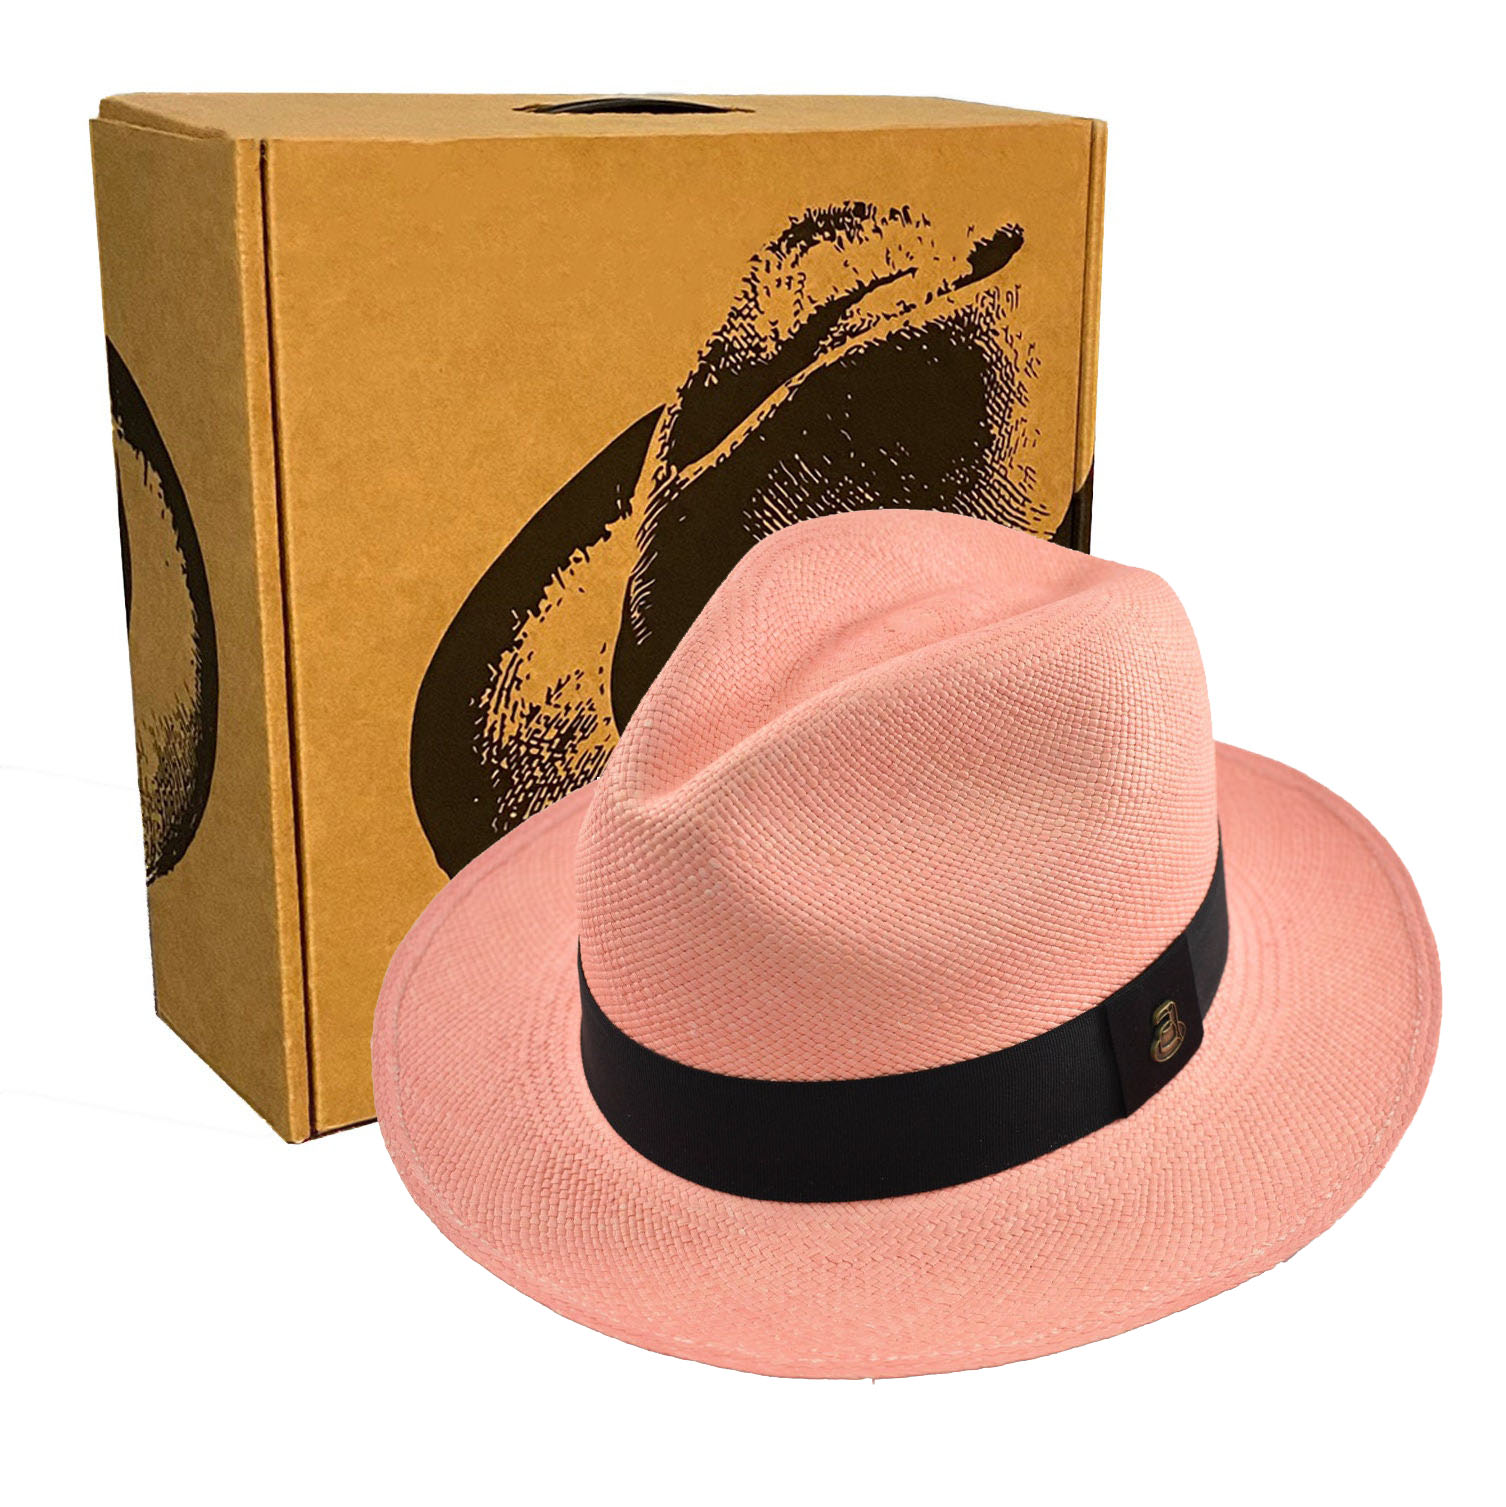 Advanced Original Panama Hat-Pink Toquilla Straw | Brown Band-Handwoven in Ecuador(HatBox Included)